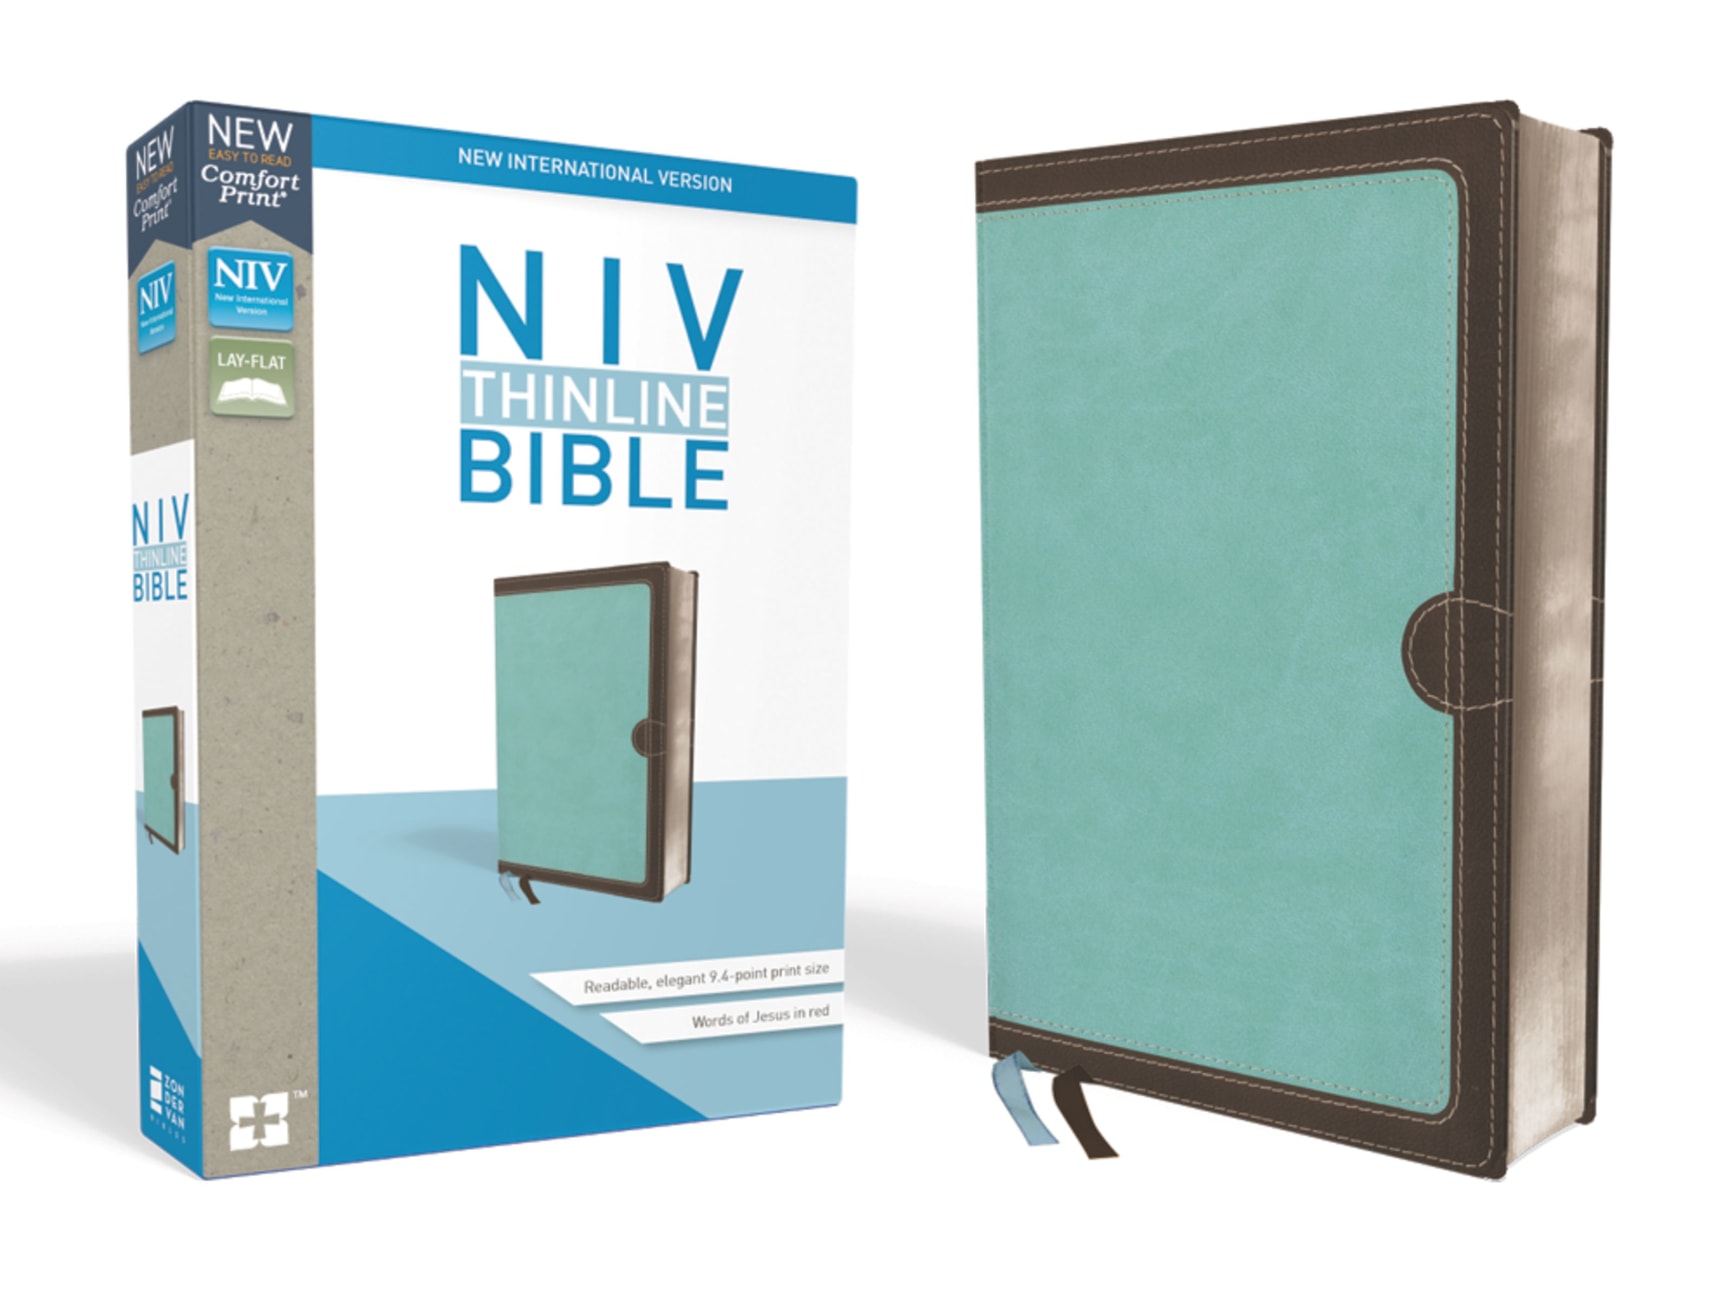 NIV Thinline Bible Blue/Brown (Red Letter Edition) Premium Imitation Leather